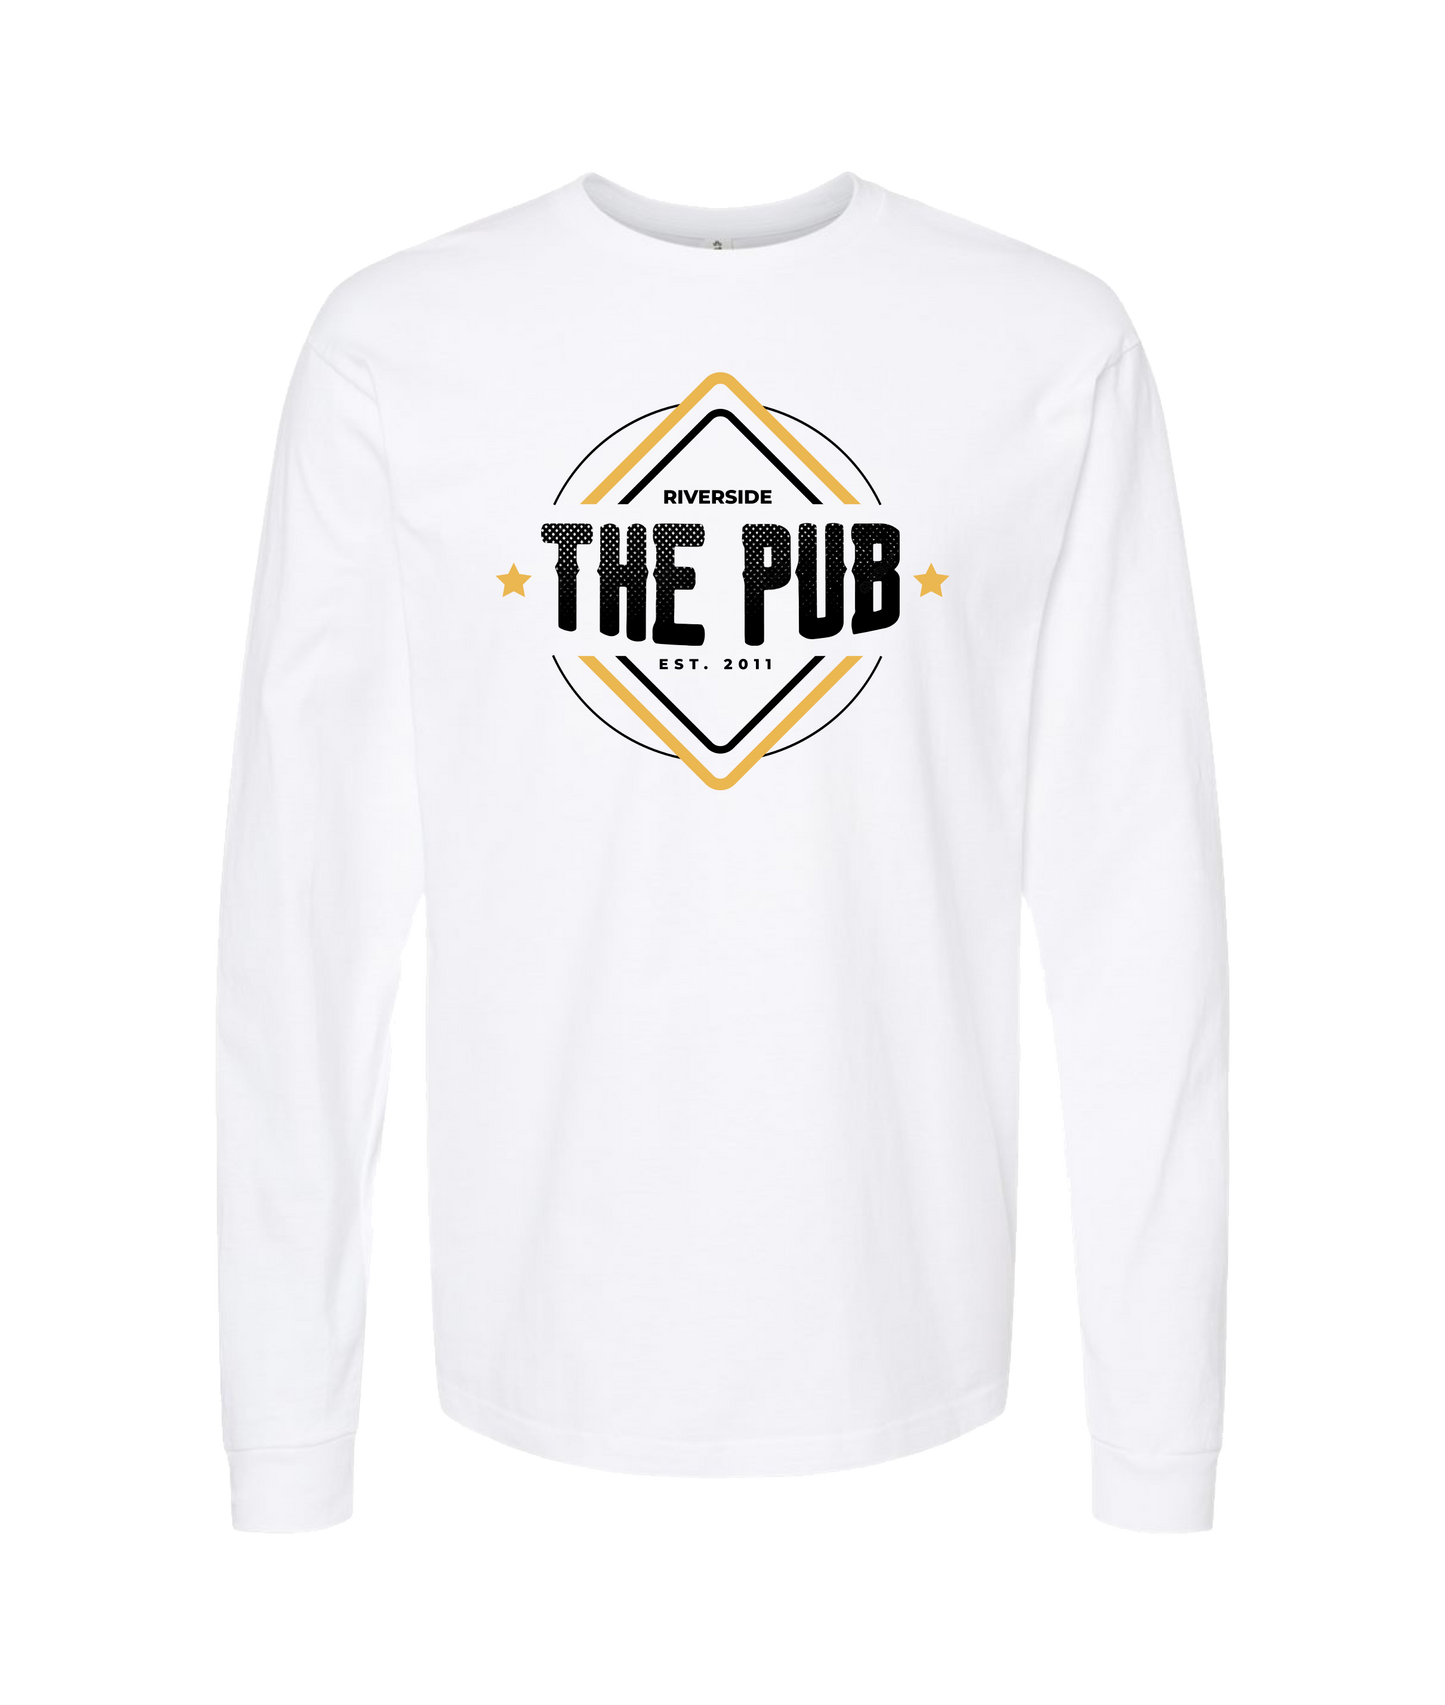 Riverside Pub and Grill - The Pub - White Long Sleeve T